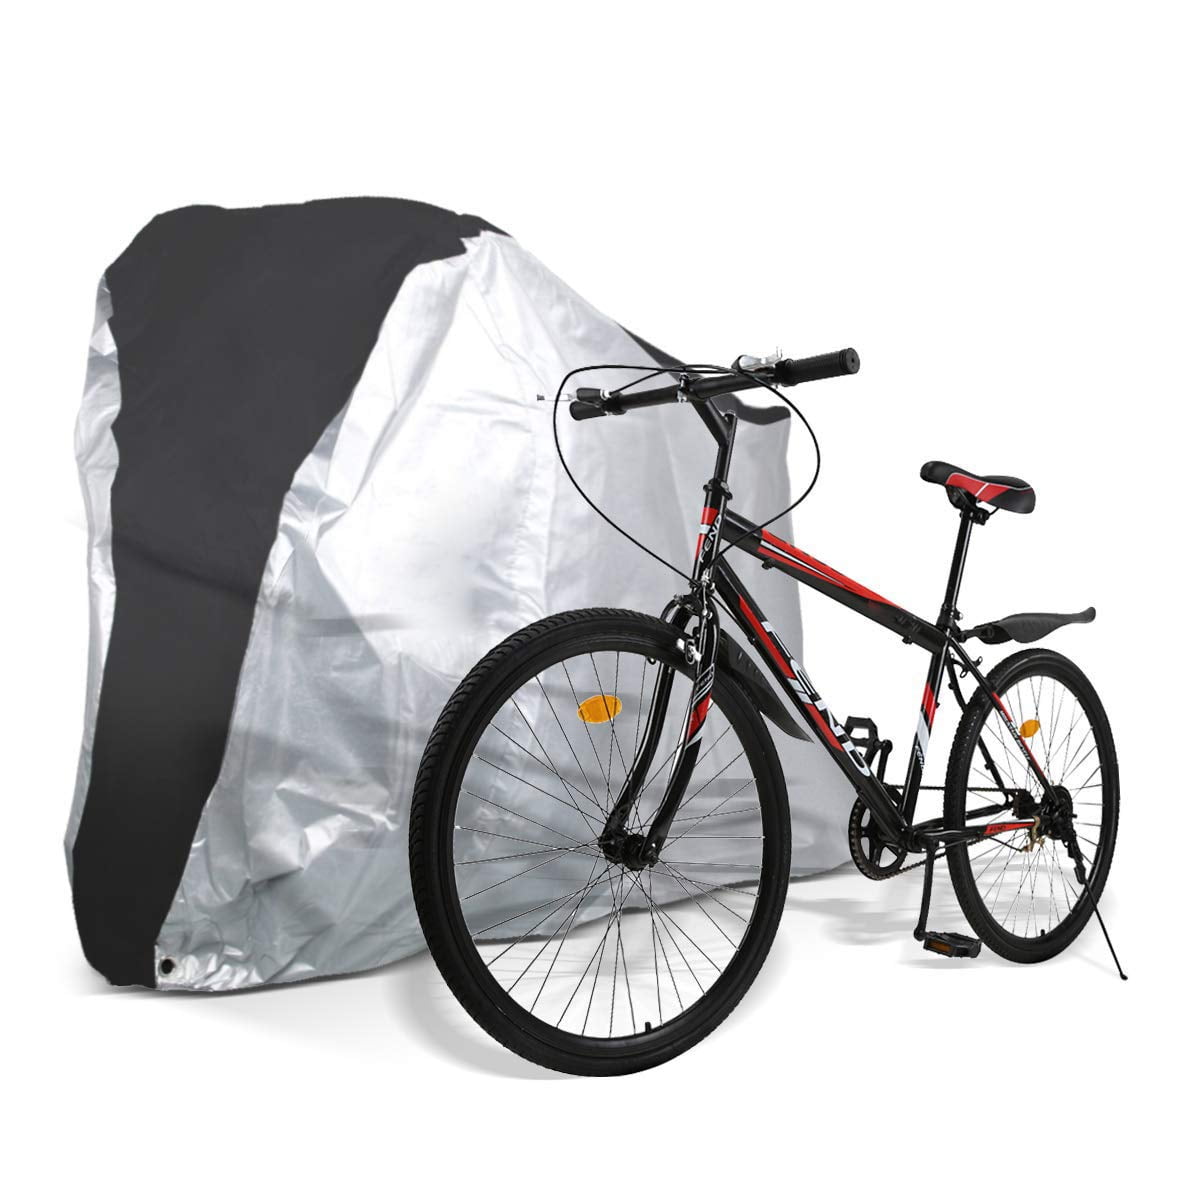 Silver Waterproof Bicycle Bike Cover Outdoor Rain Dust UV Protection For 3 Bikes 